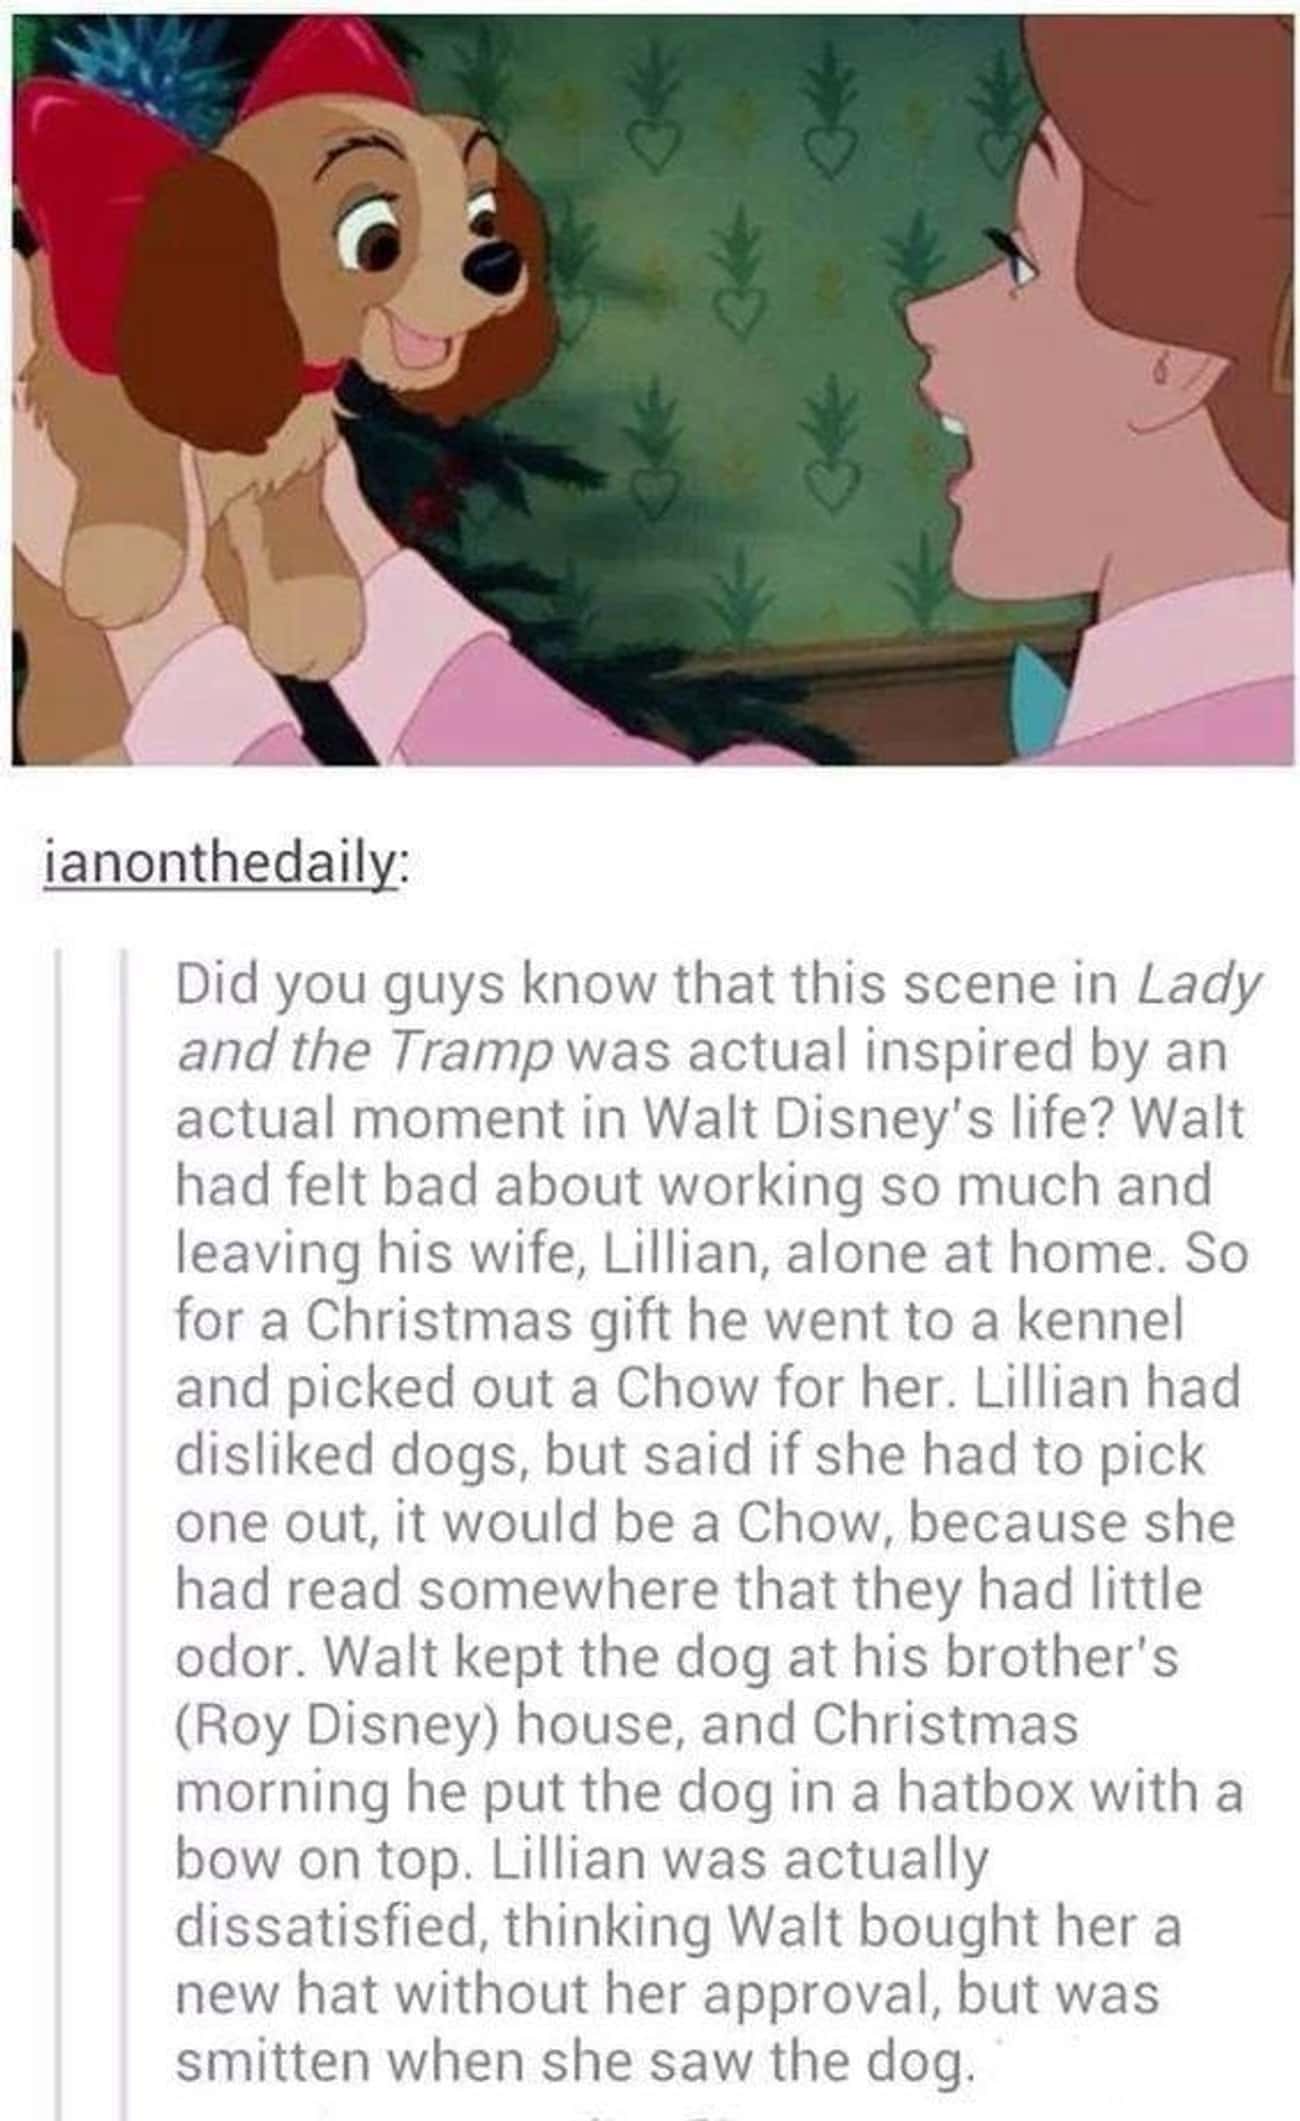 The Opening Scene For 'Lady and the Tramp' Was Based On A Real Moment Between Walt Disney And His Wife 